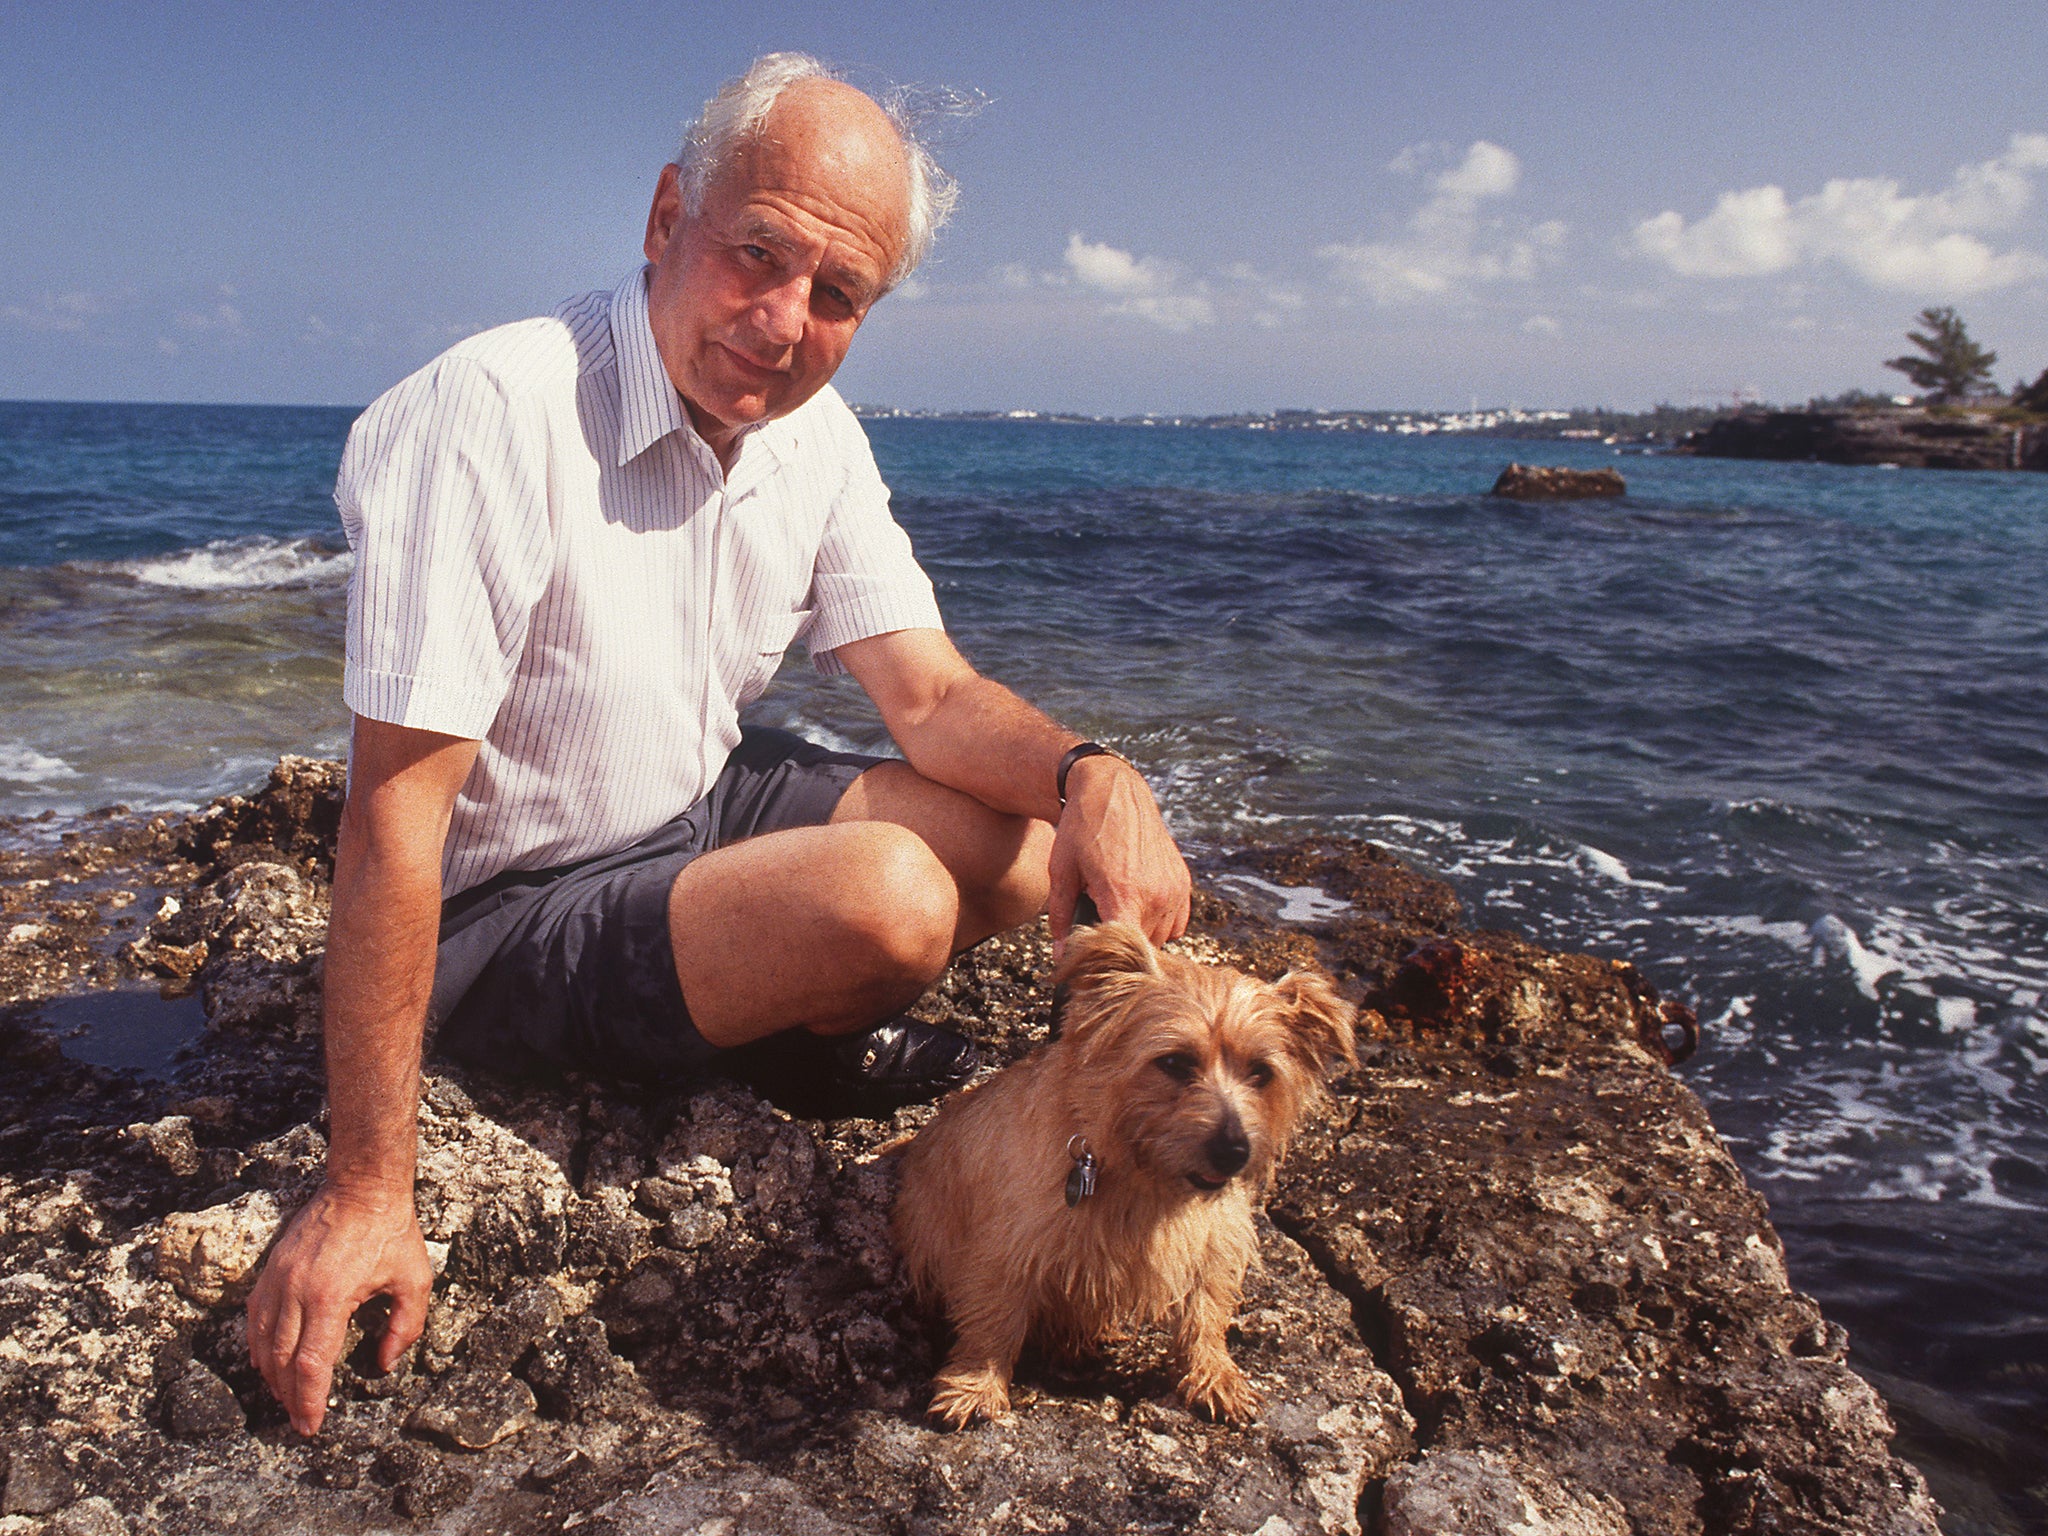 The lord in Bermuda with his pet dog in 1993